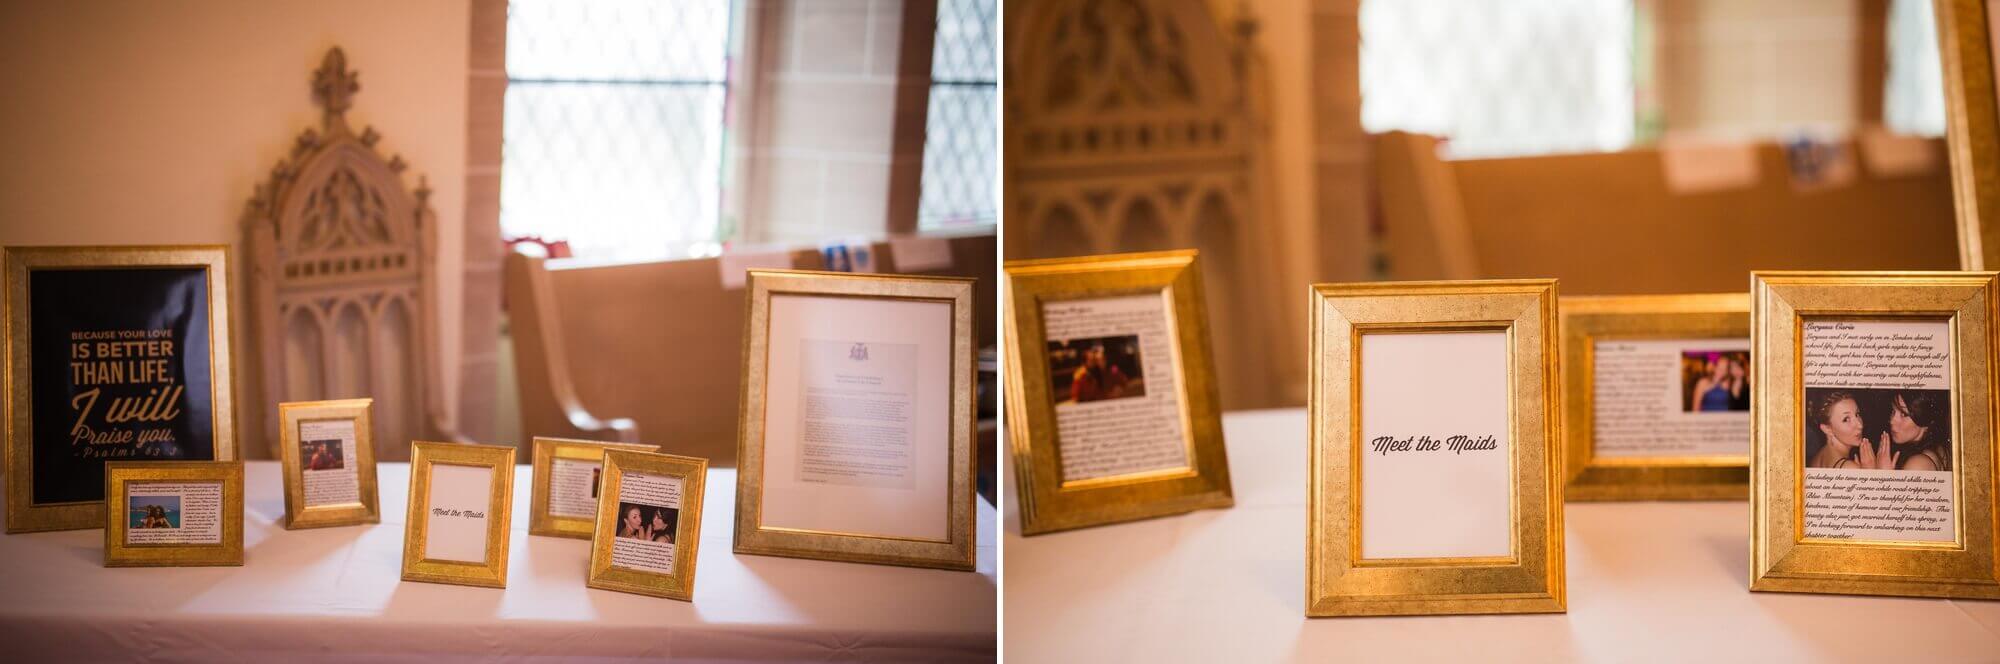 Ceremony details displaying framed stories of the wedding party in Toronto